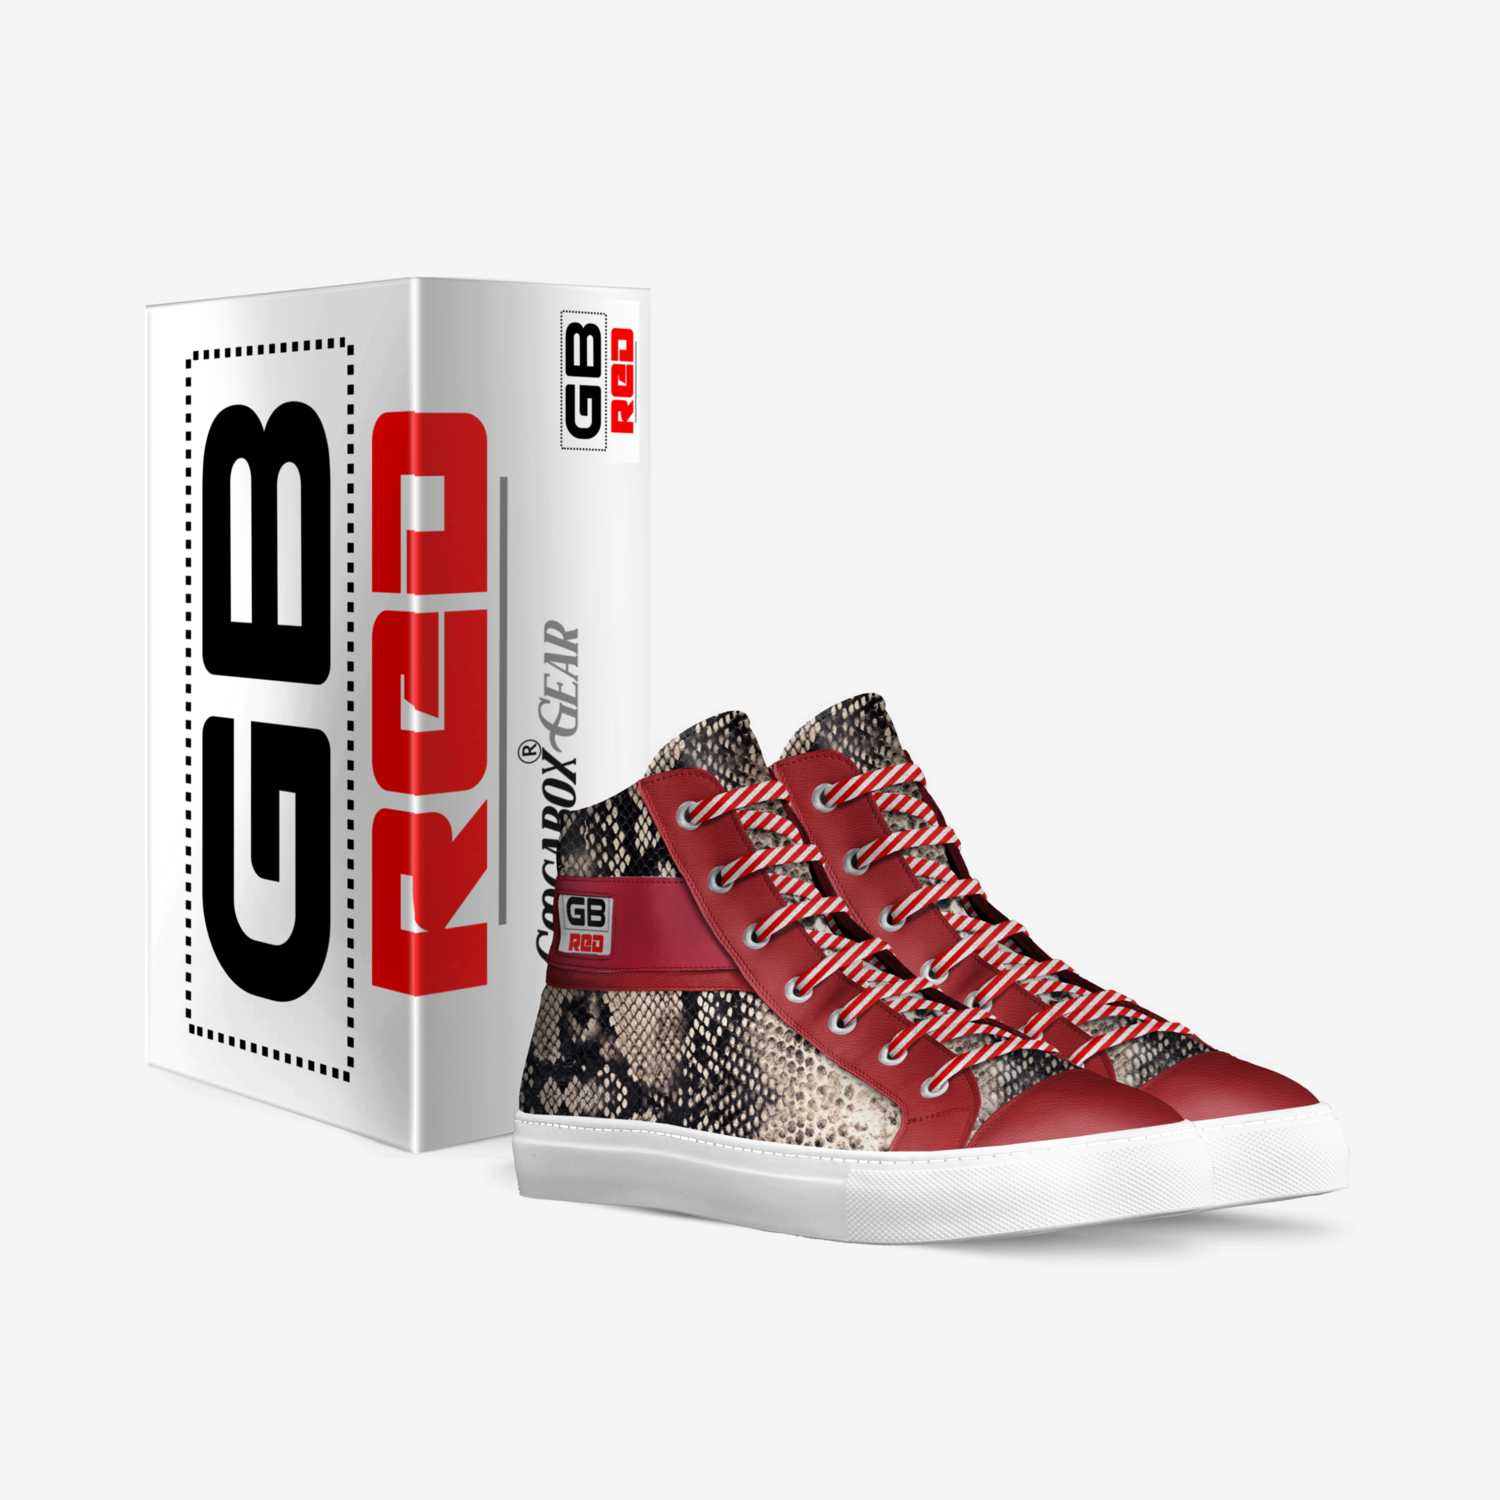 GOOGABOX RED custom made in Italy shoes by GOOGABOX (GWI) | Box view